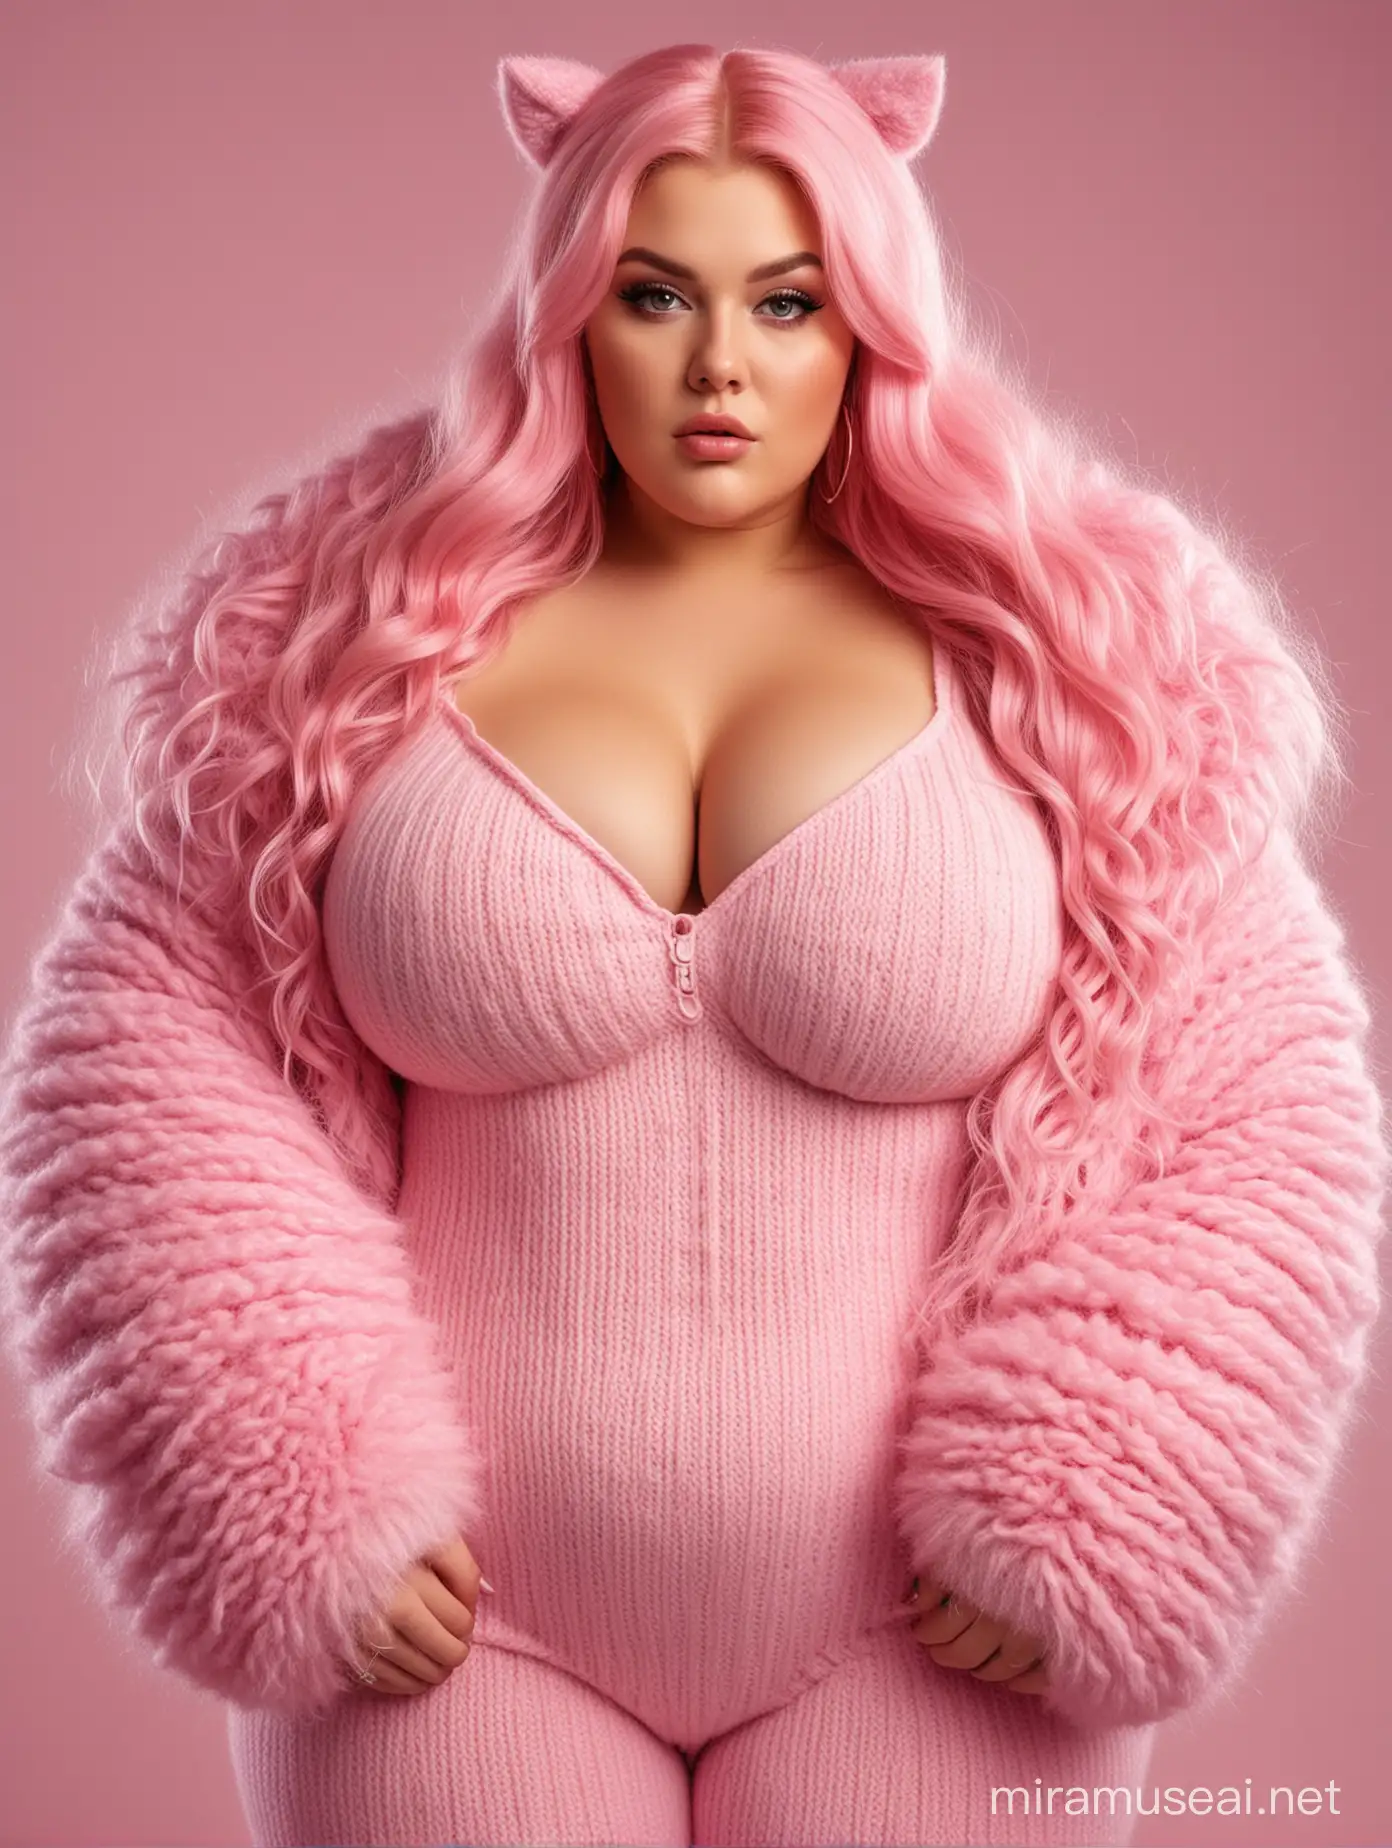 Stunning Curvy PlusSize Model in Pink Fuzzy Catsuit